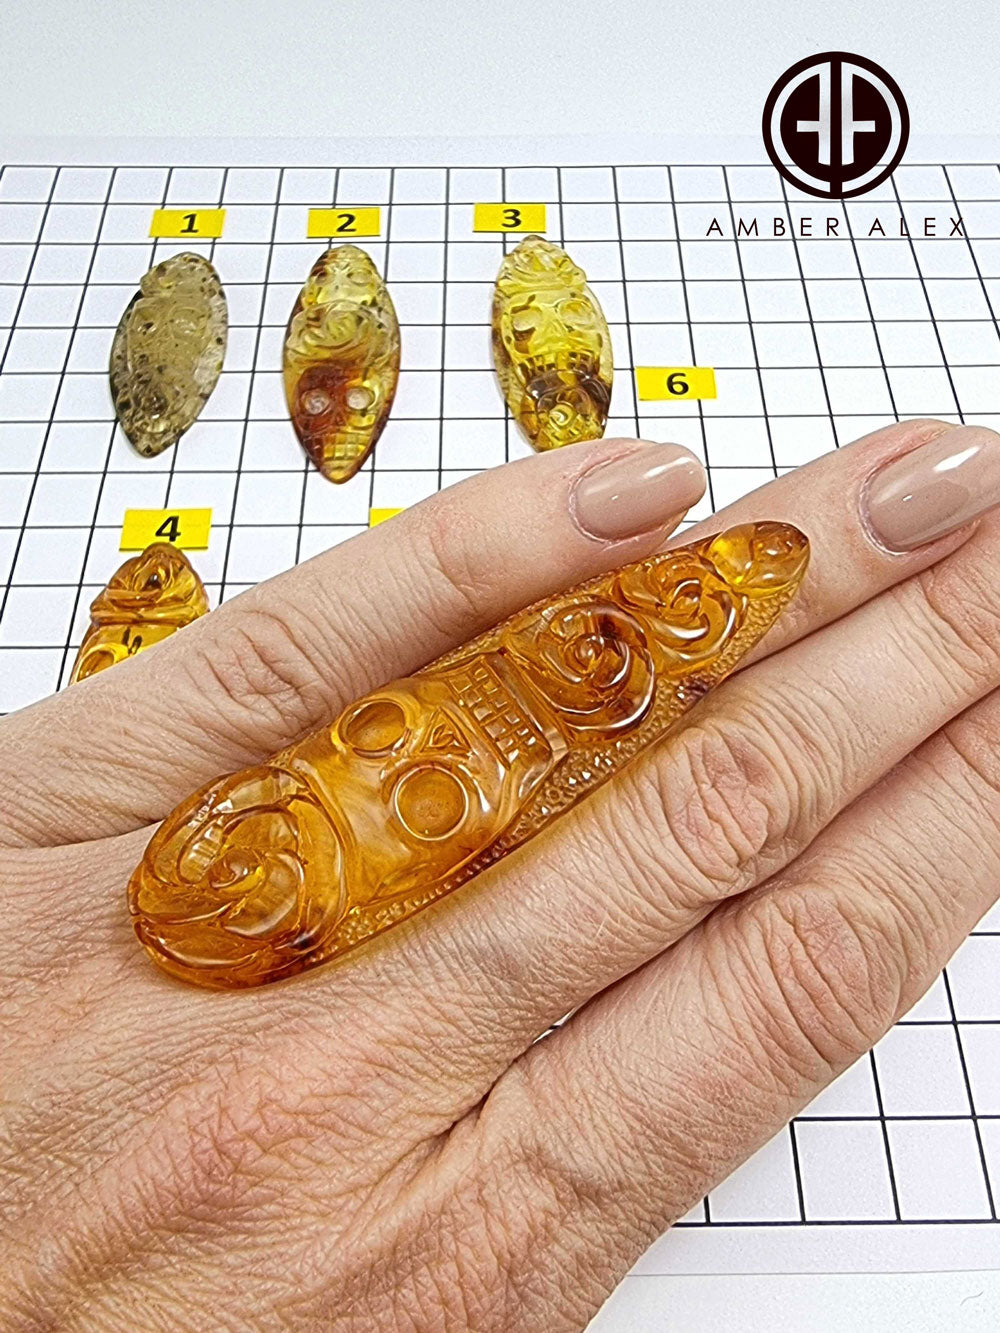 Cognac & Fossil Amber Carved Roses And Skull Cabochons